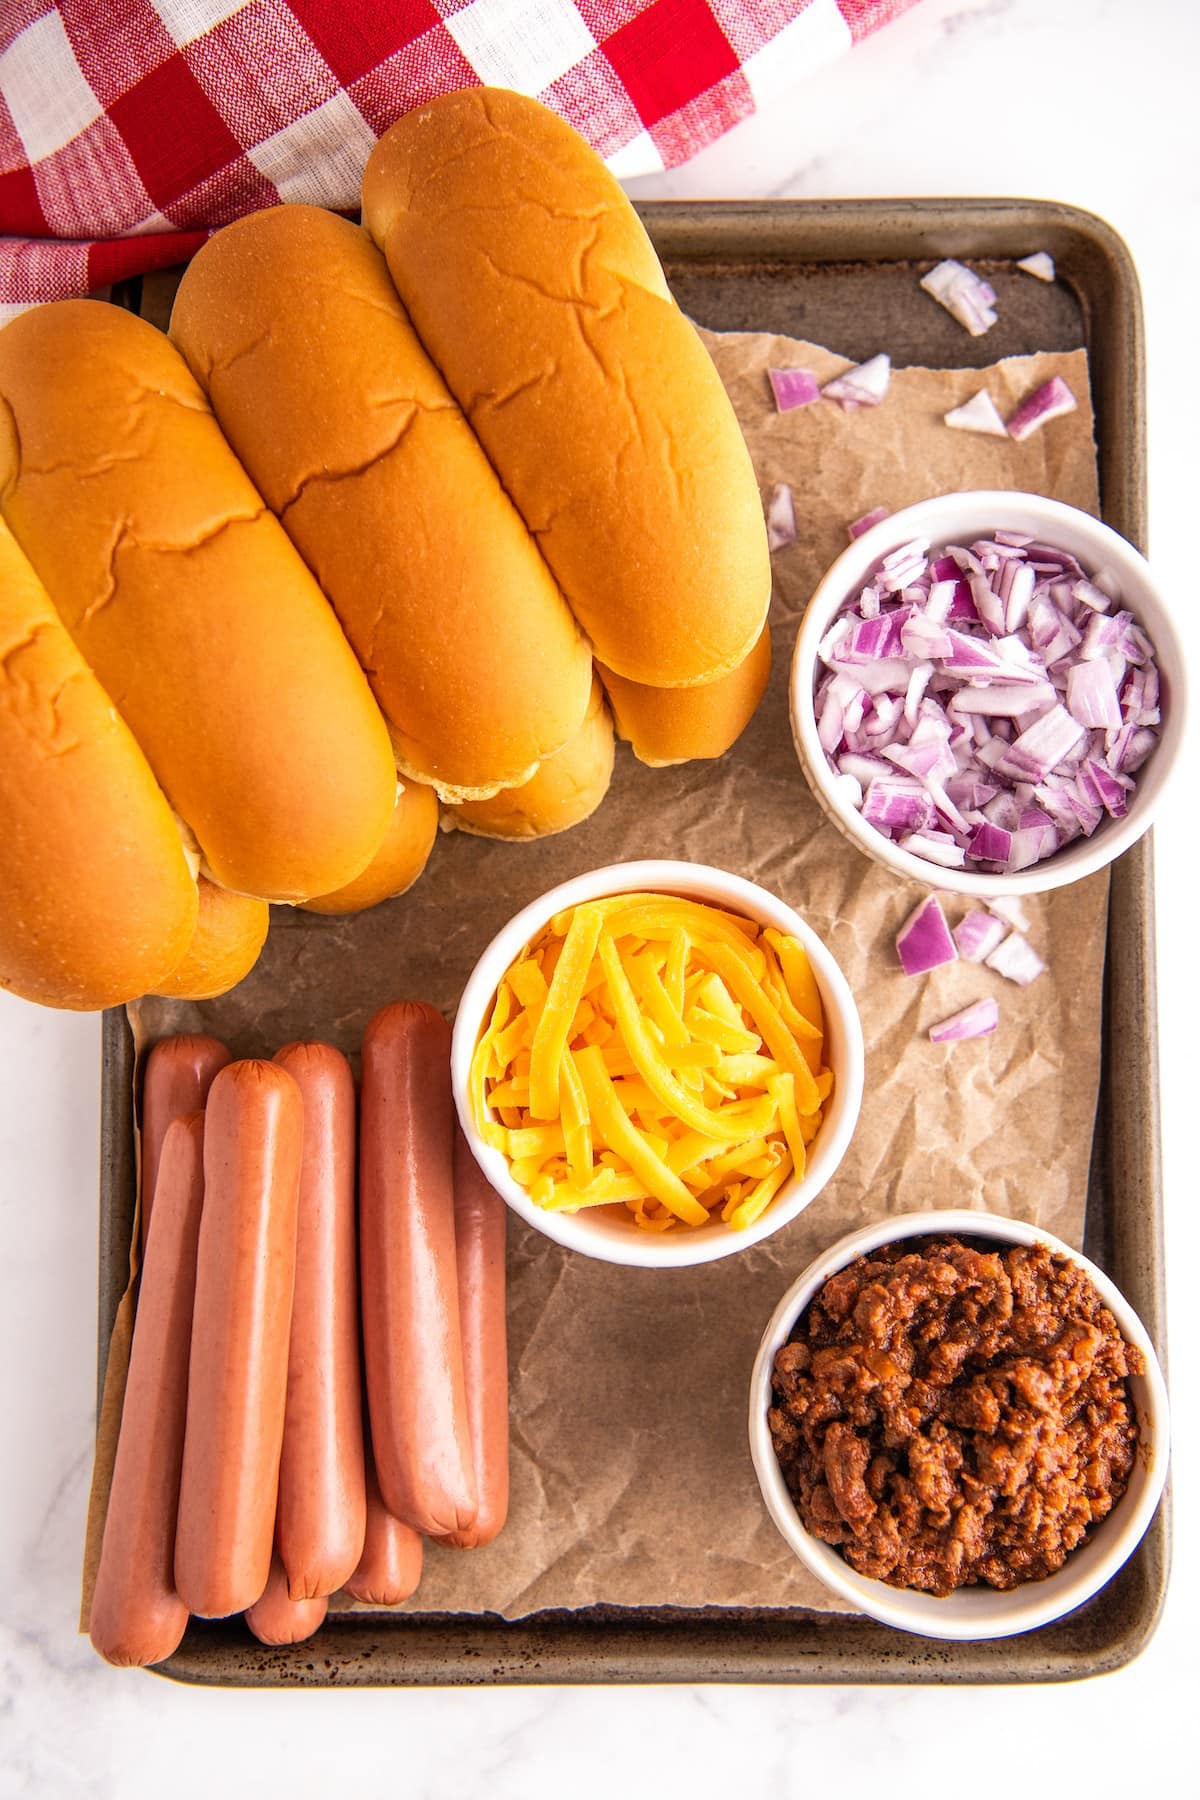 Chili dogs ingredients on a tray.